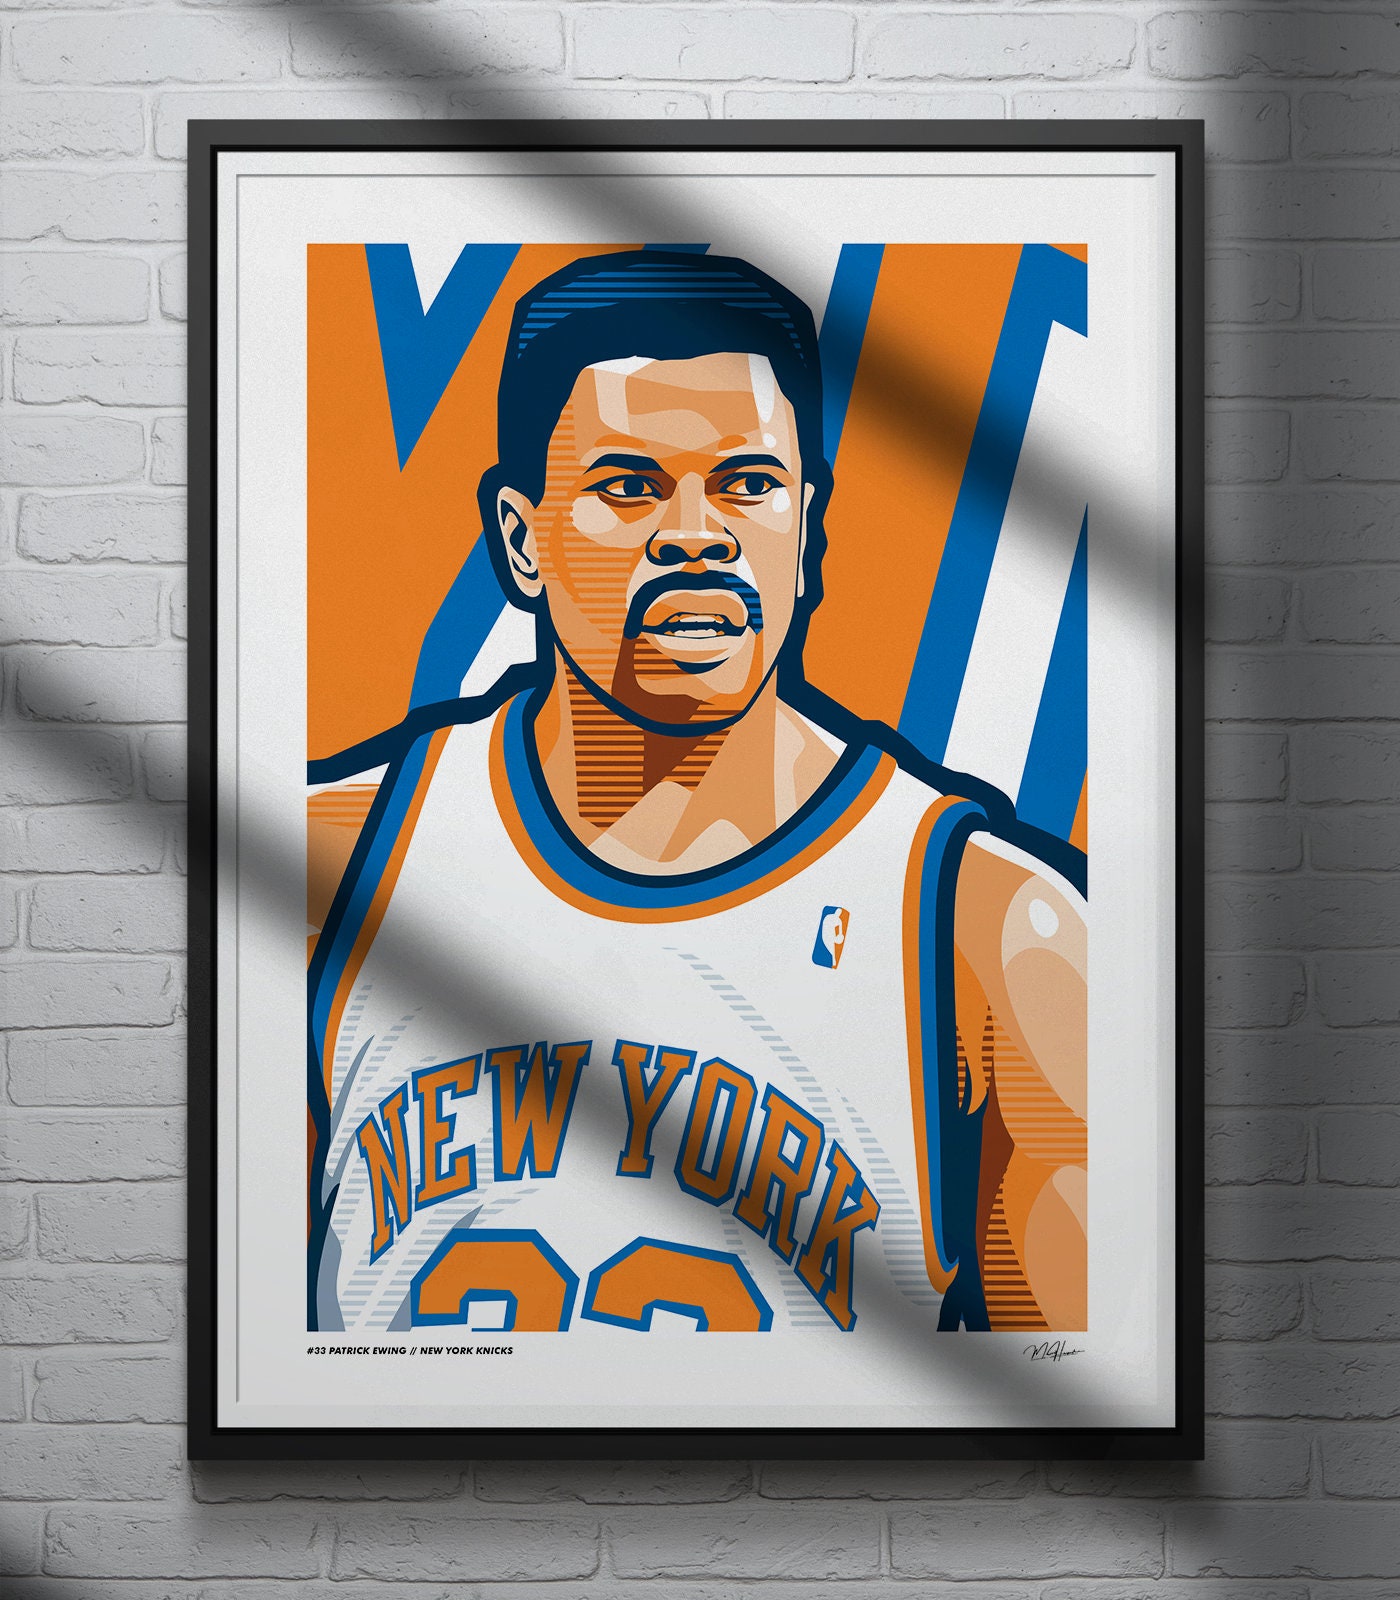 New York Knicks Patrick Ewing Sports Illustrated Cover Canvas Print /  Canvas Art by Sports Illustrated - Sports Illustrated Covers